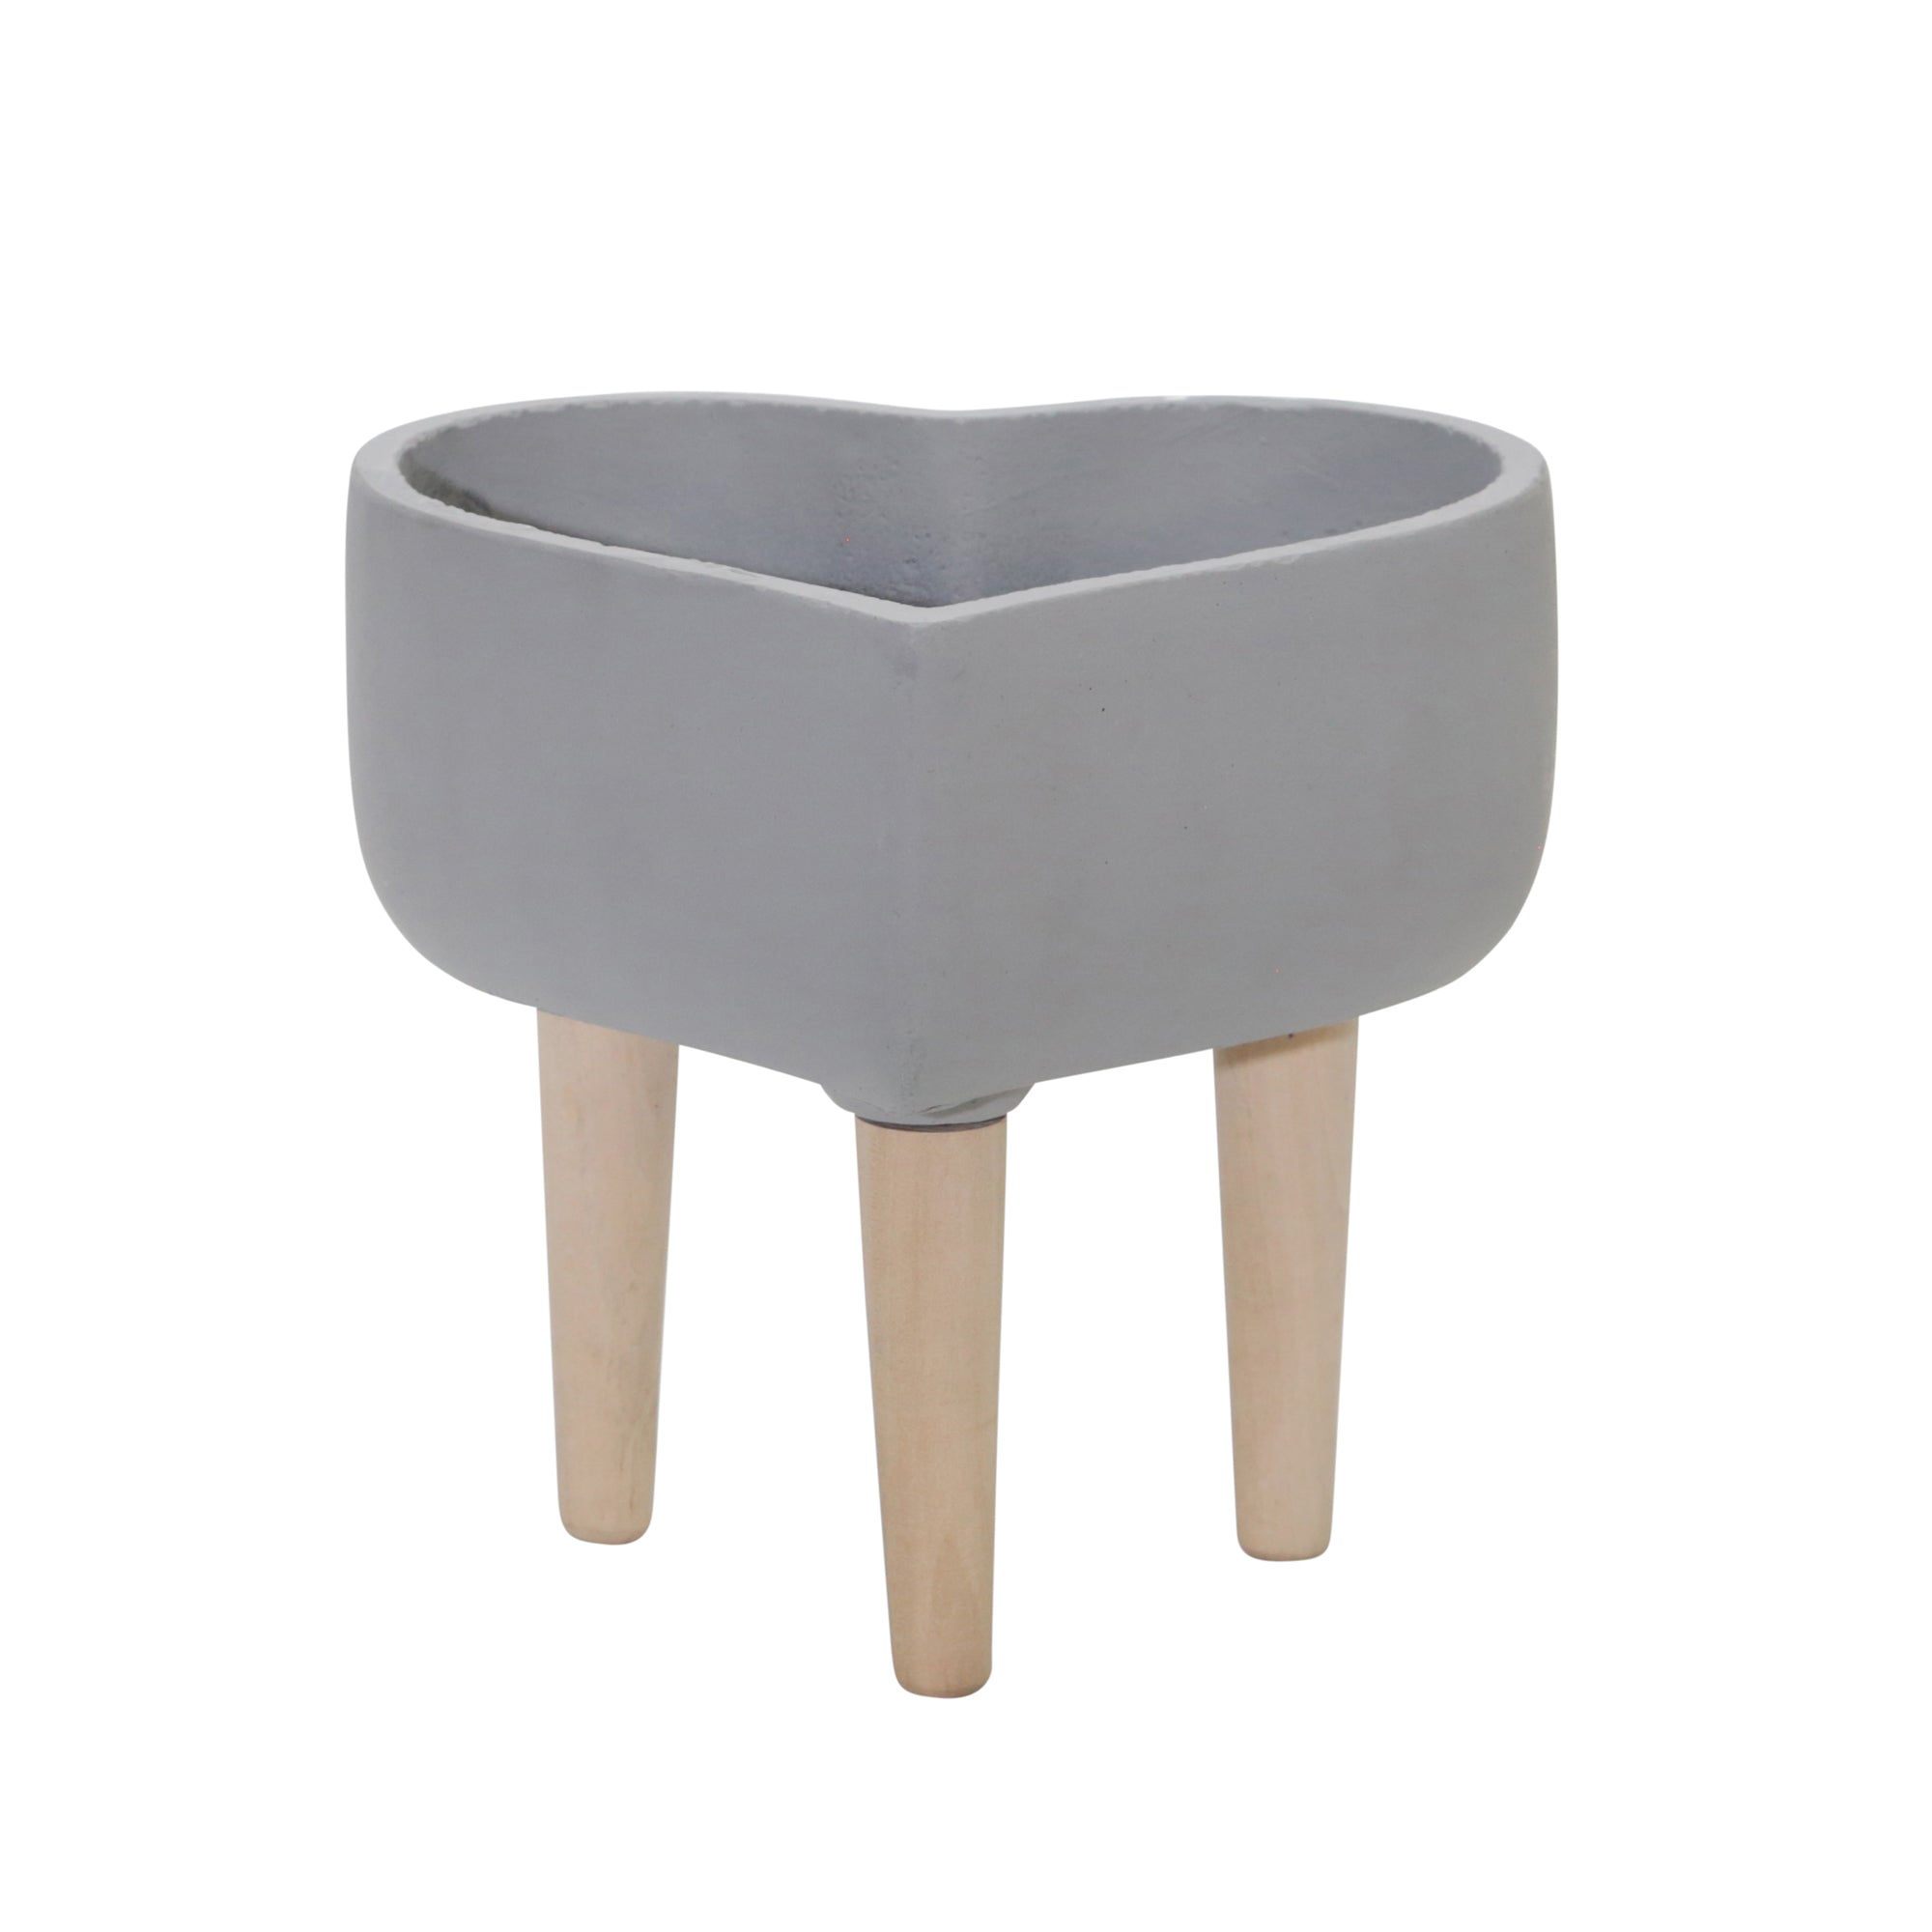 9" Heart Planter with Wooden Legs, Gray, Planters